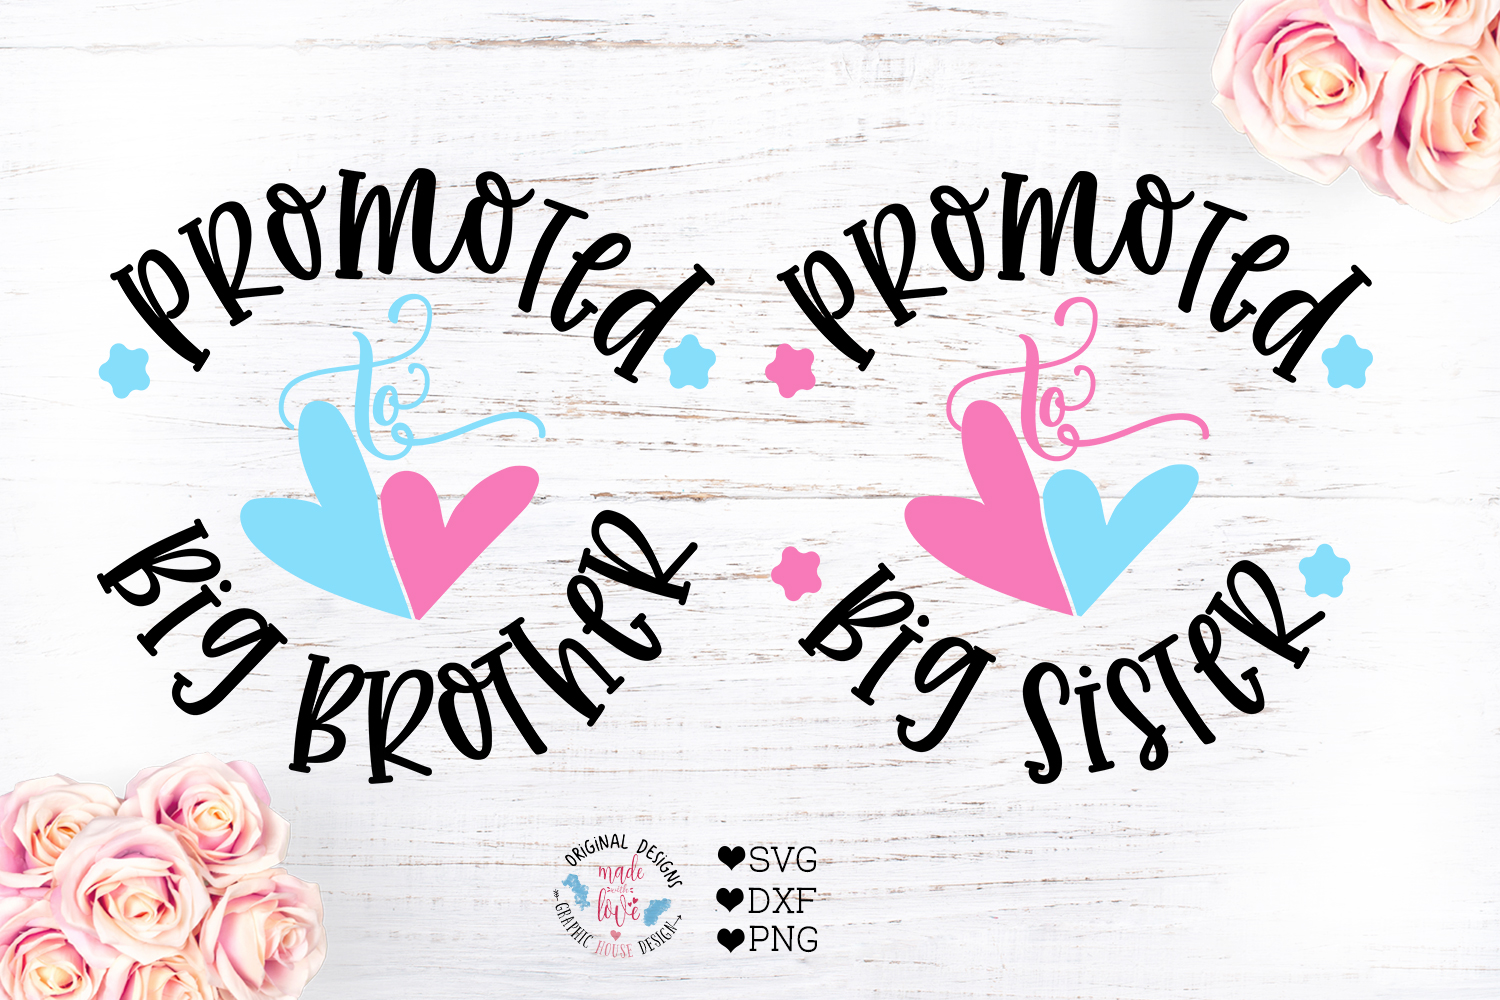 View Promoted To Big Sister Svg Free Images Free SVG files Silhouette.